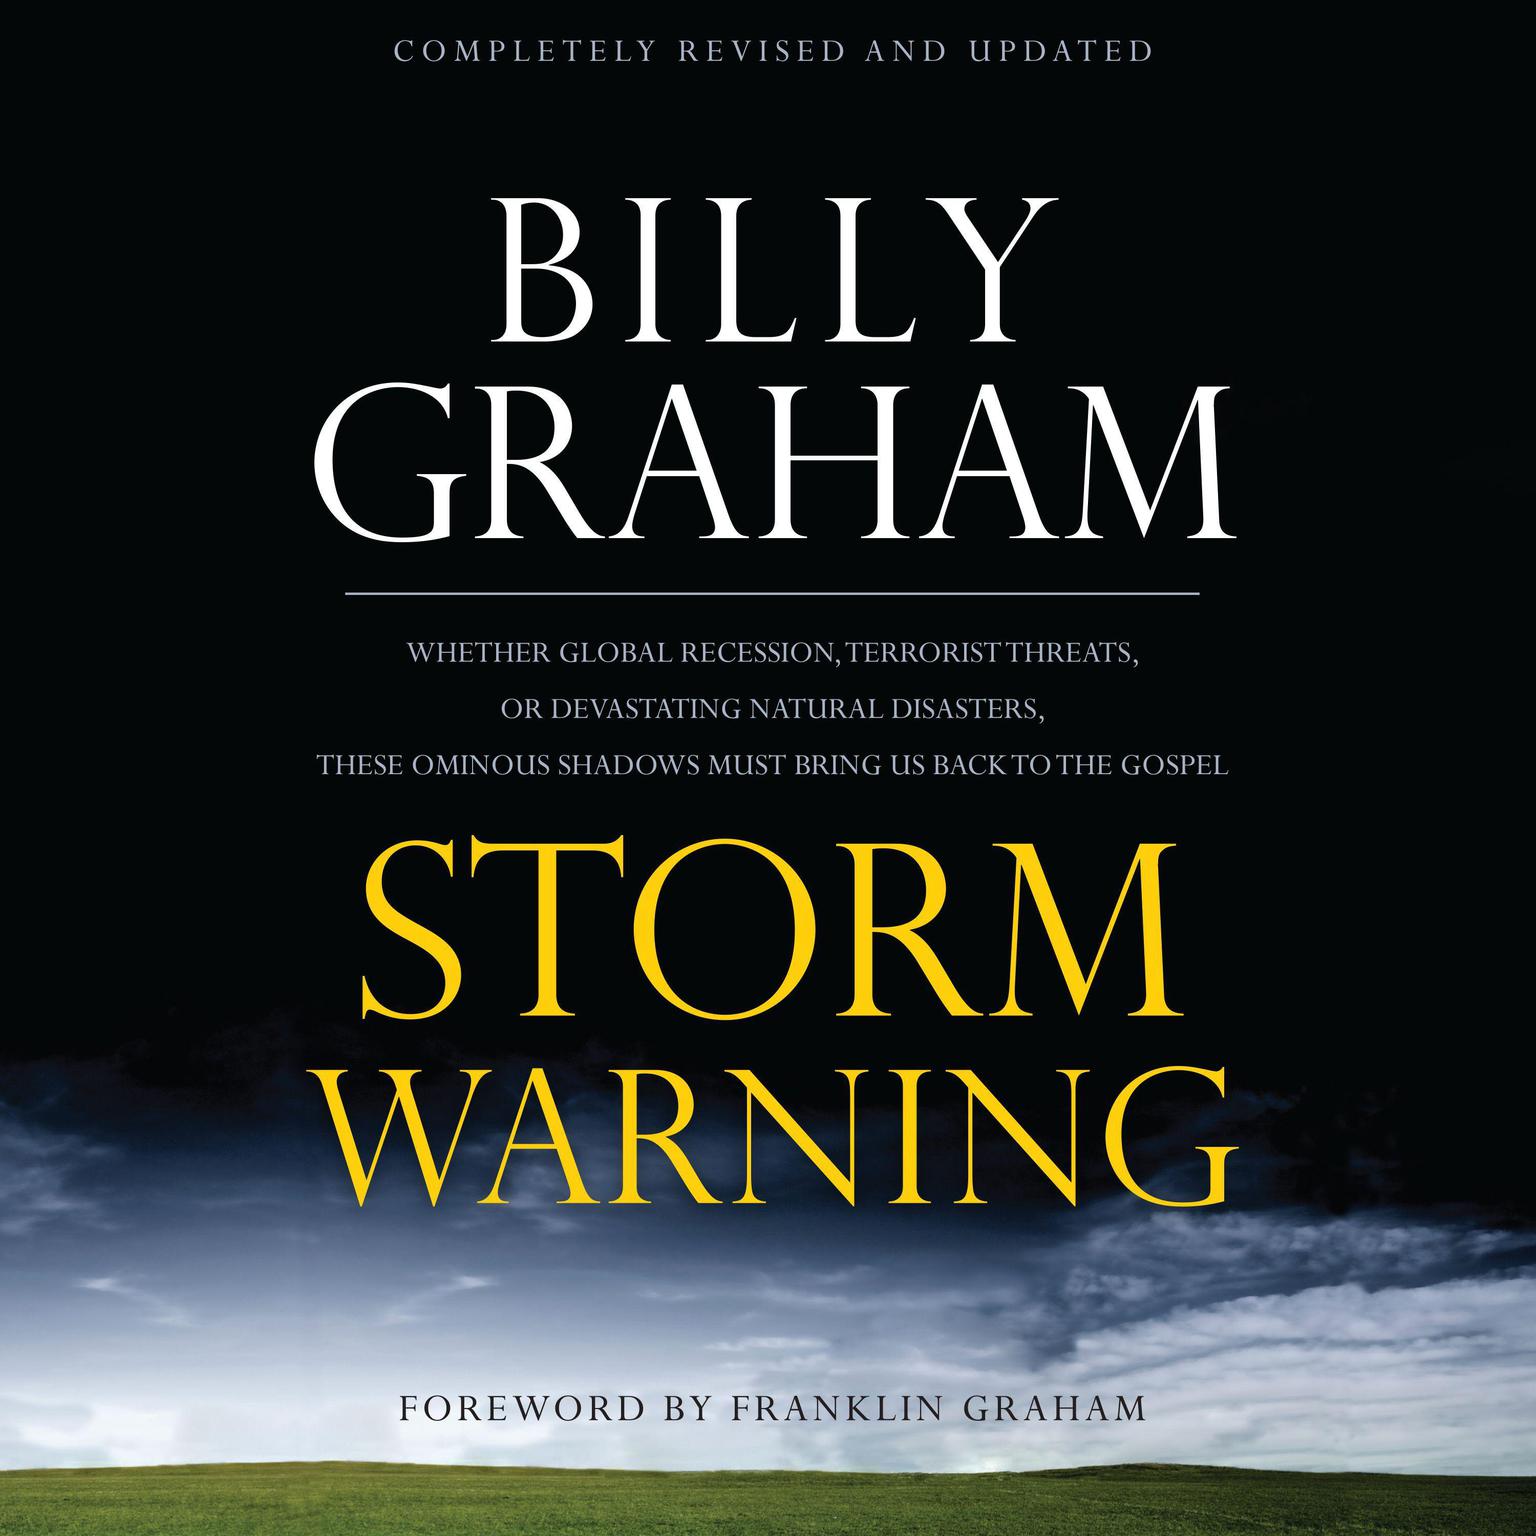 Storm Warning: Whether global recession, terrorist threats, or devastating natural disasters, these ominous shadows must bring us back to the Gospel. Audiobook, by Billy Graham